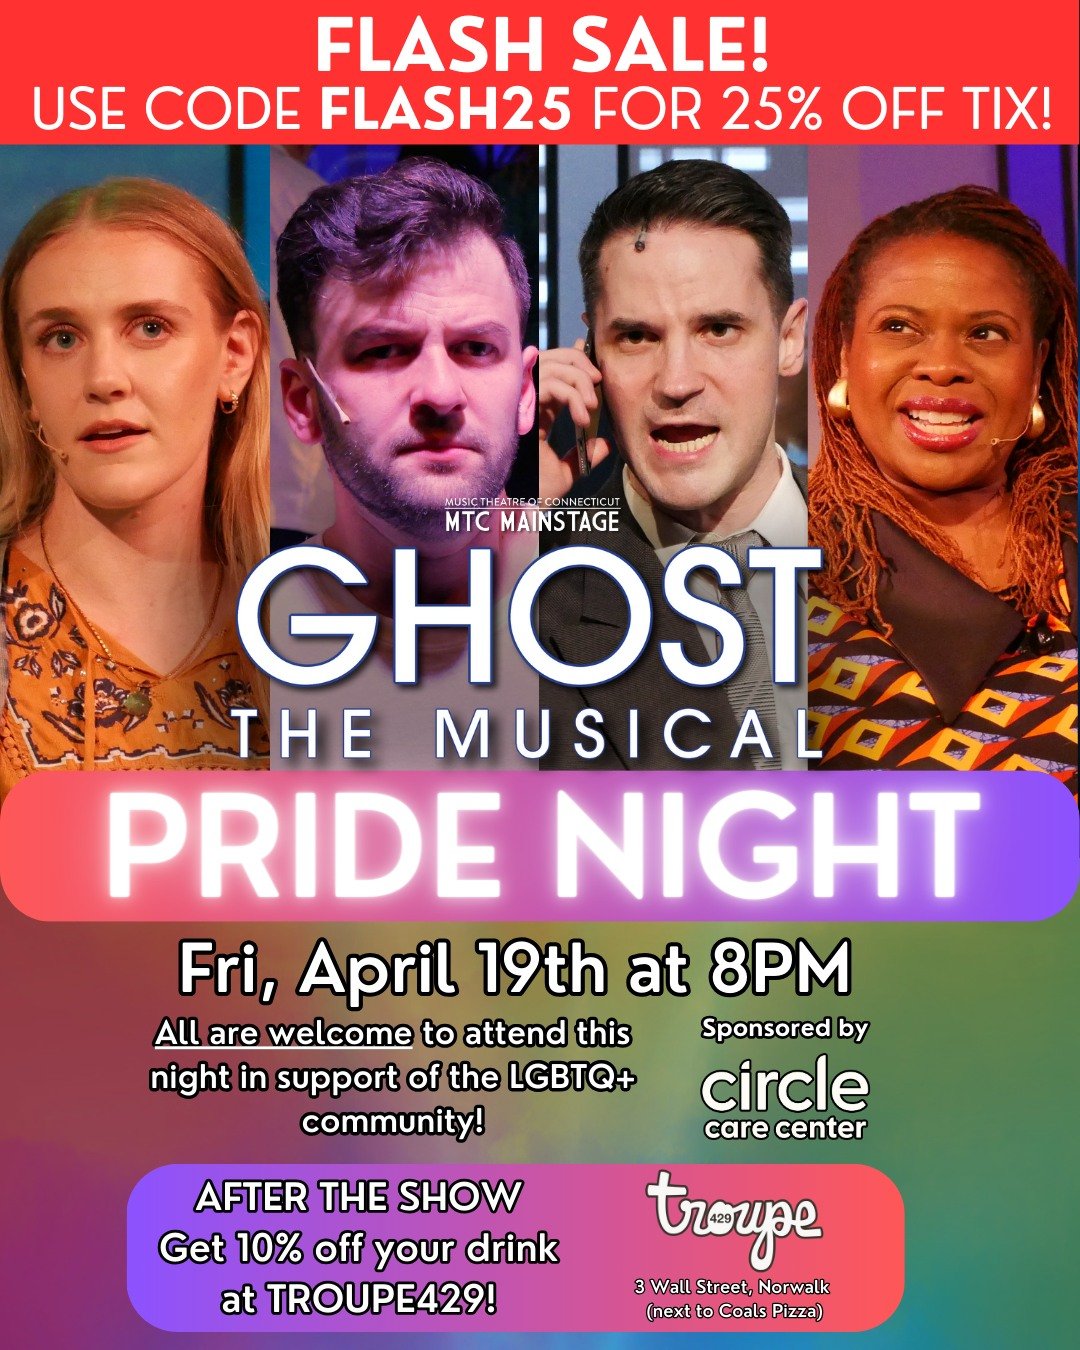 🏳️&zwj;🌈✨PRIDE NIGHT LAST MINUTE FLASH SALE!✨🏳️&zwj;🌈

Don't miss our PRIDE NIGHT for GHOST THE MUSICAL tomorrow night (4/19) at 8PM and enjoy a PRIDE NIGHT exclusive discount!*

Sponsored by MTC's season sponsor Circle Care Center, we have been 